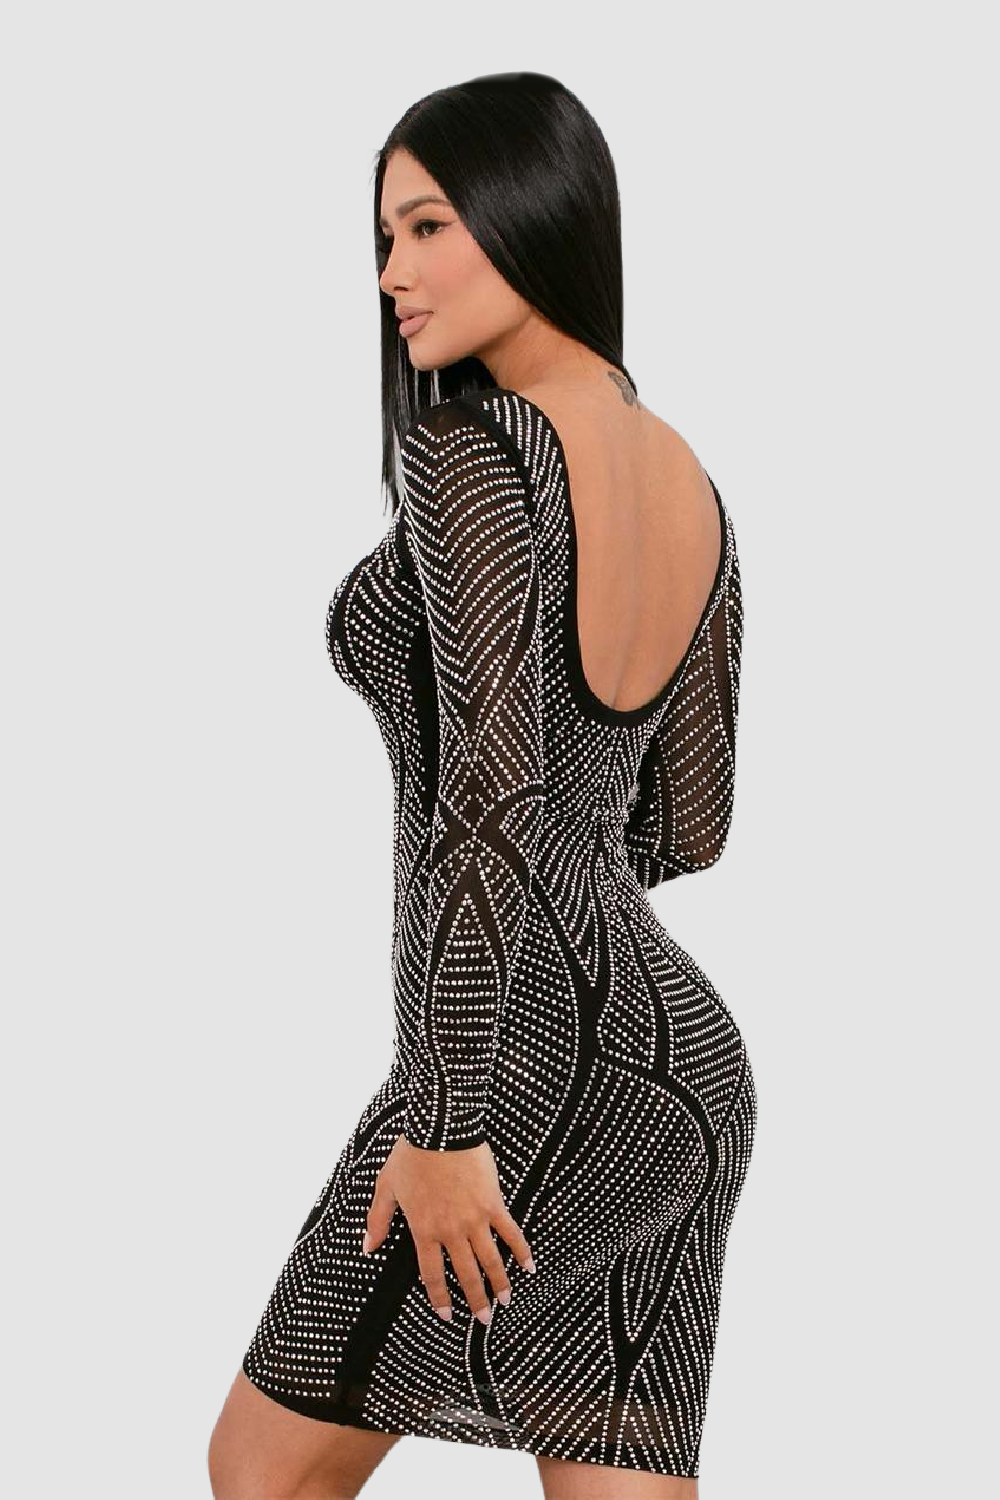 Black long sleeve cocktail mini dress with all over silver crystals. Very classy, yet sexy with an open back.